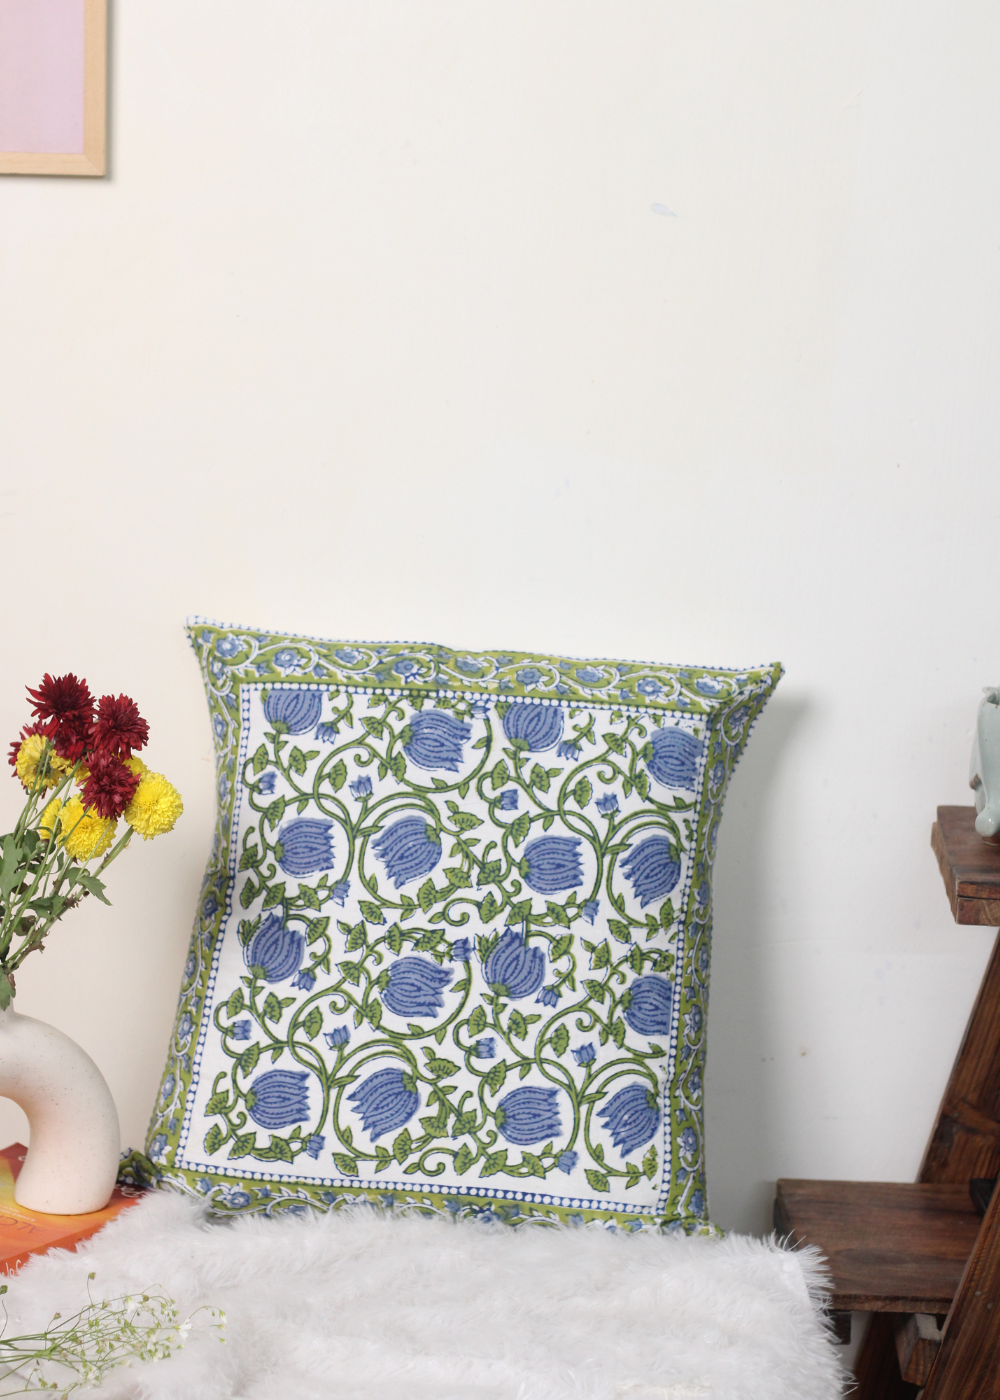 Blue and green cushion cover blockprinted